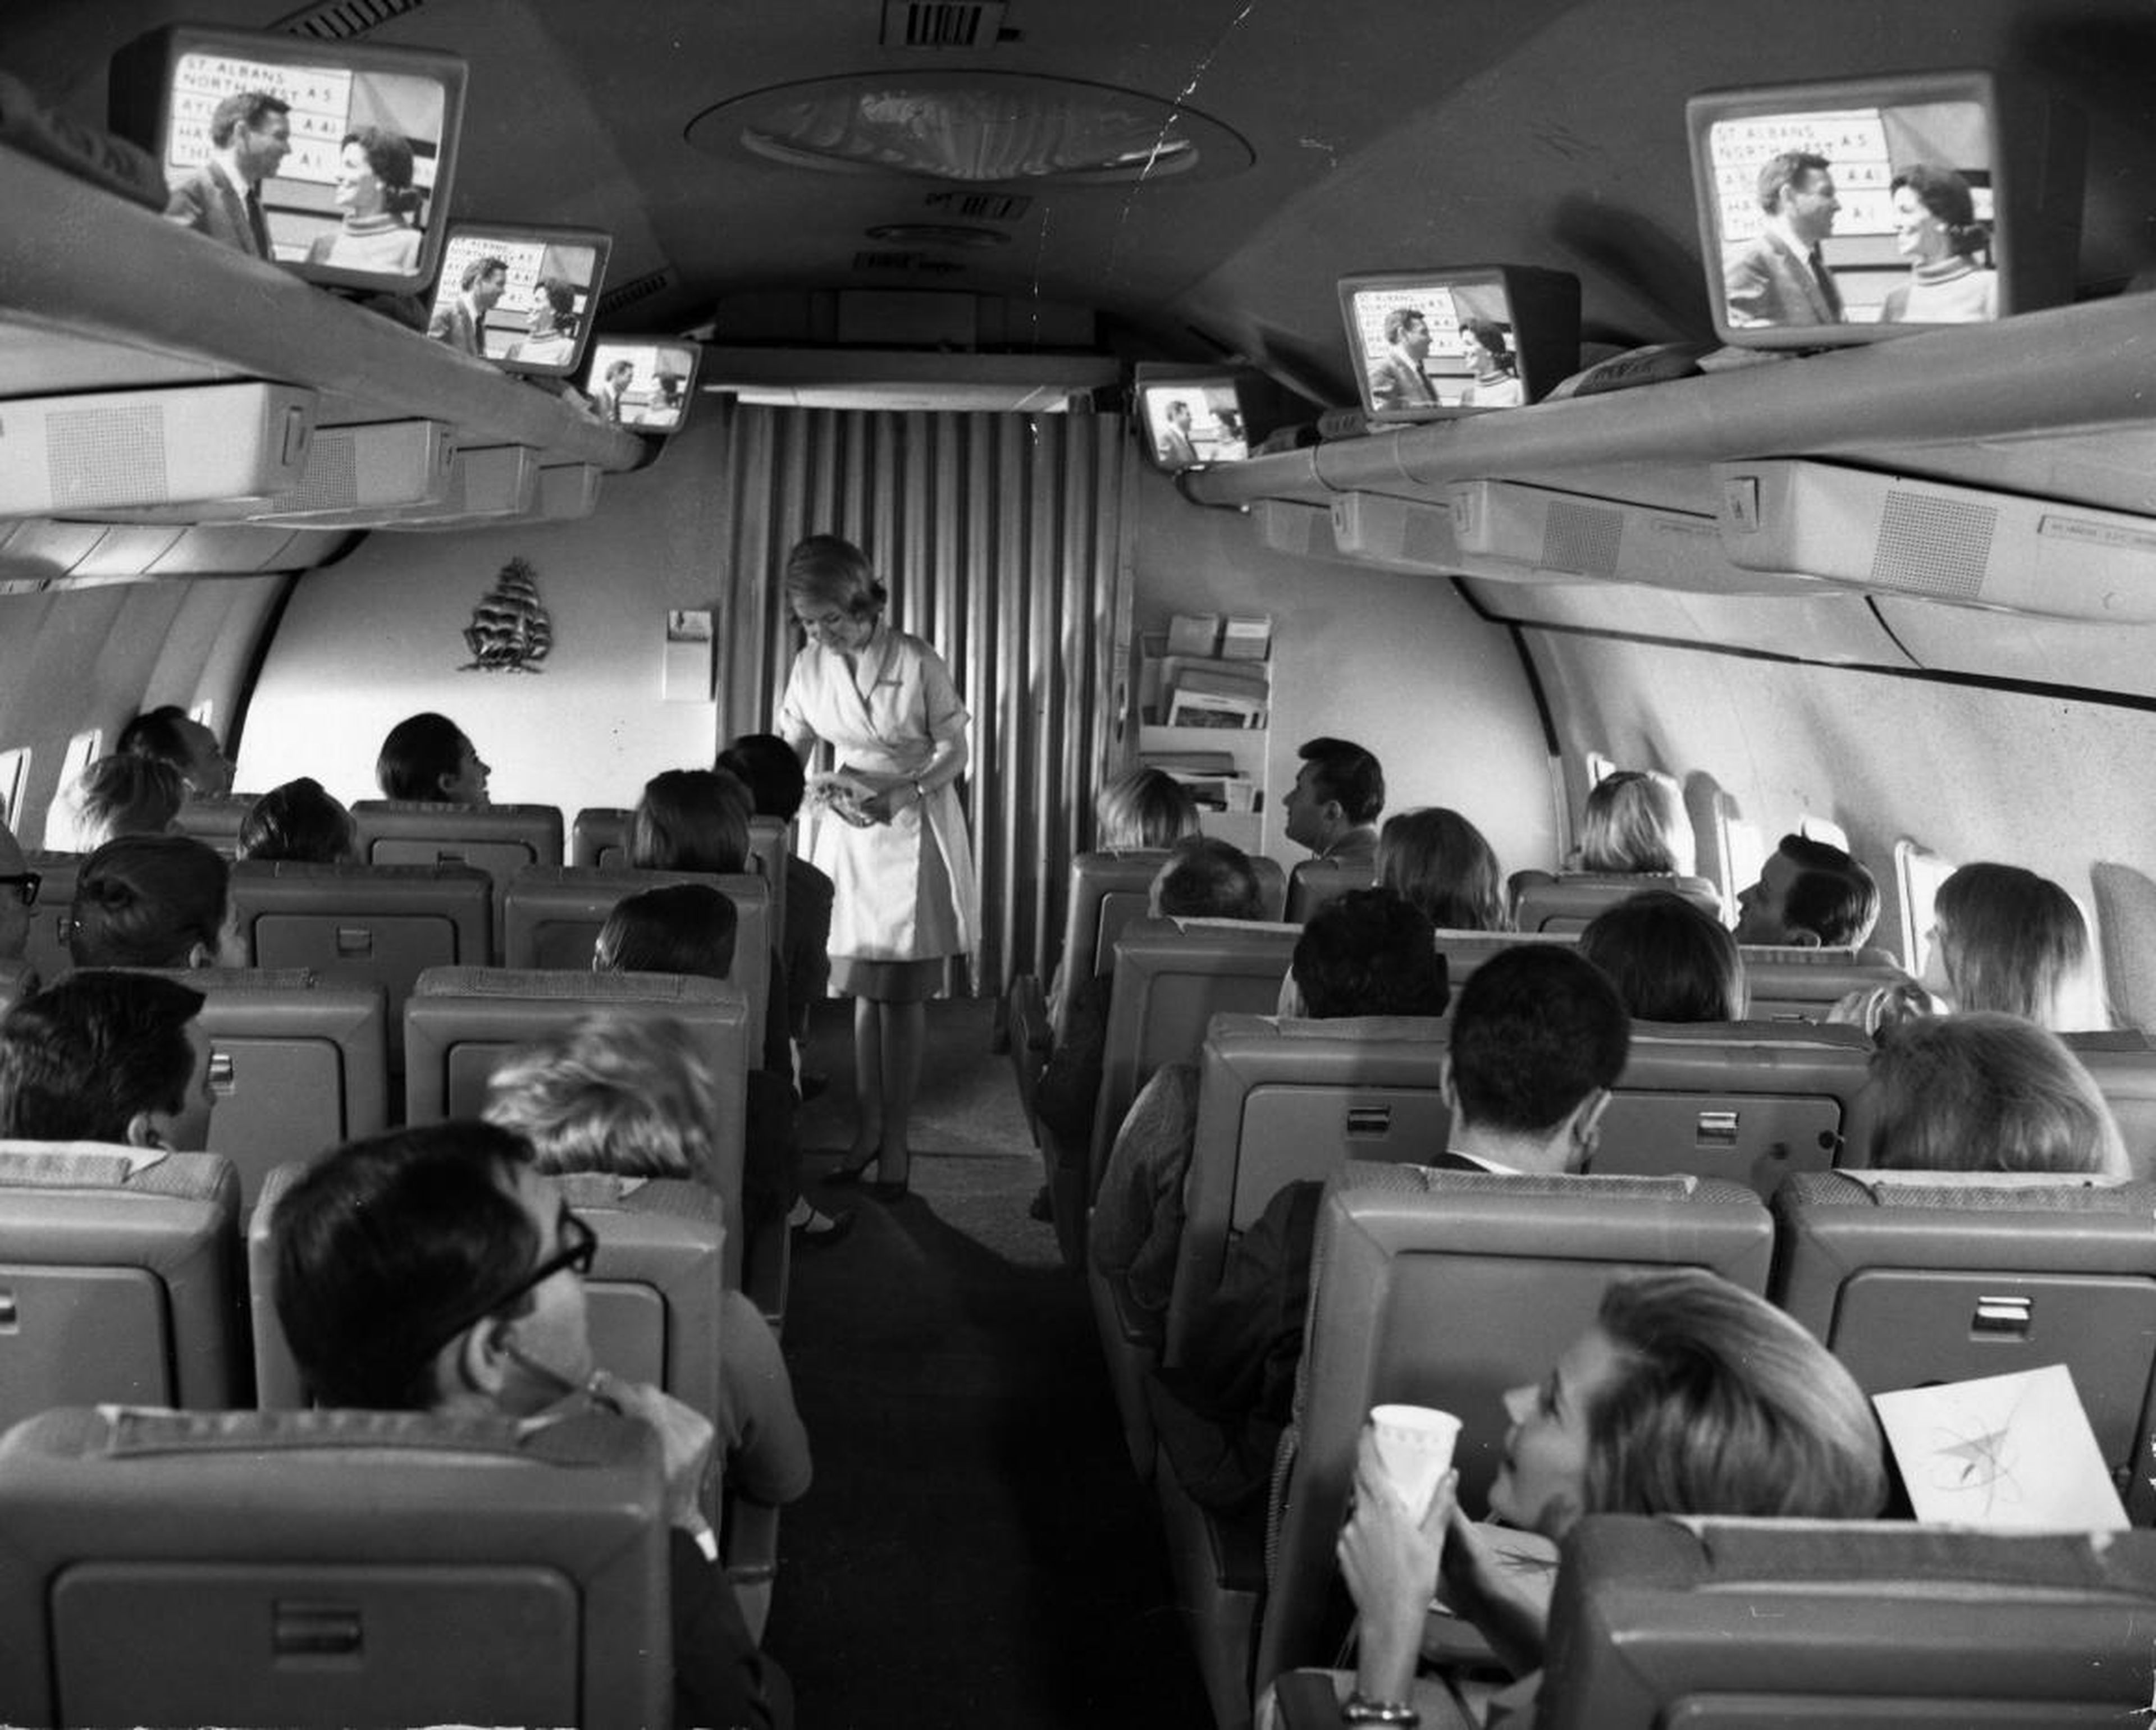 In-flight entertainment has come a long way since this experimental Pan Am system from 1965.